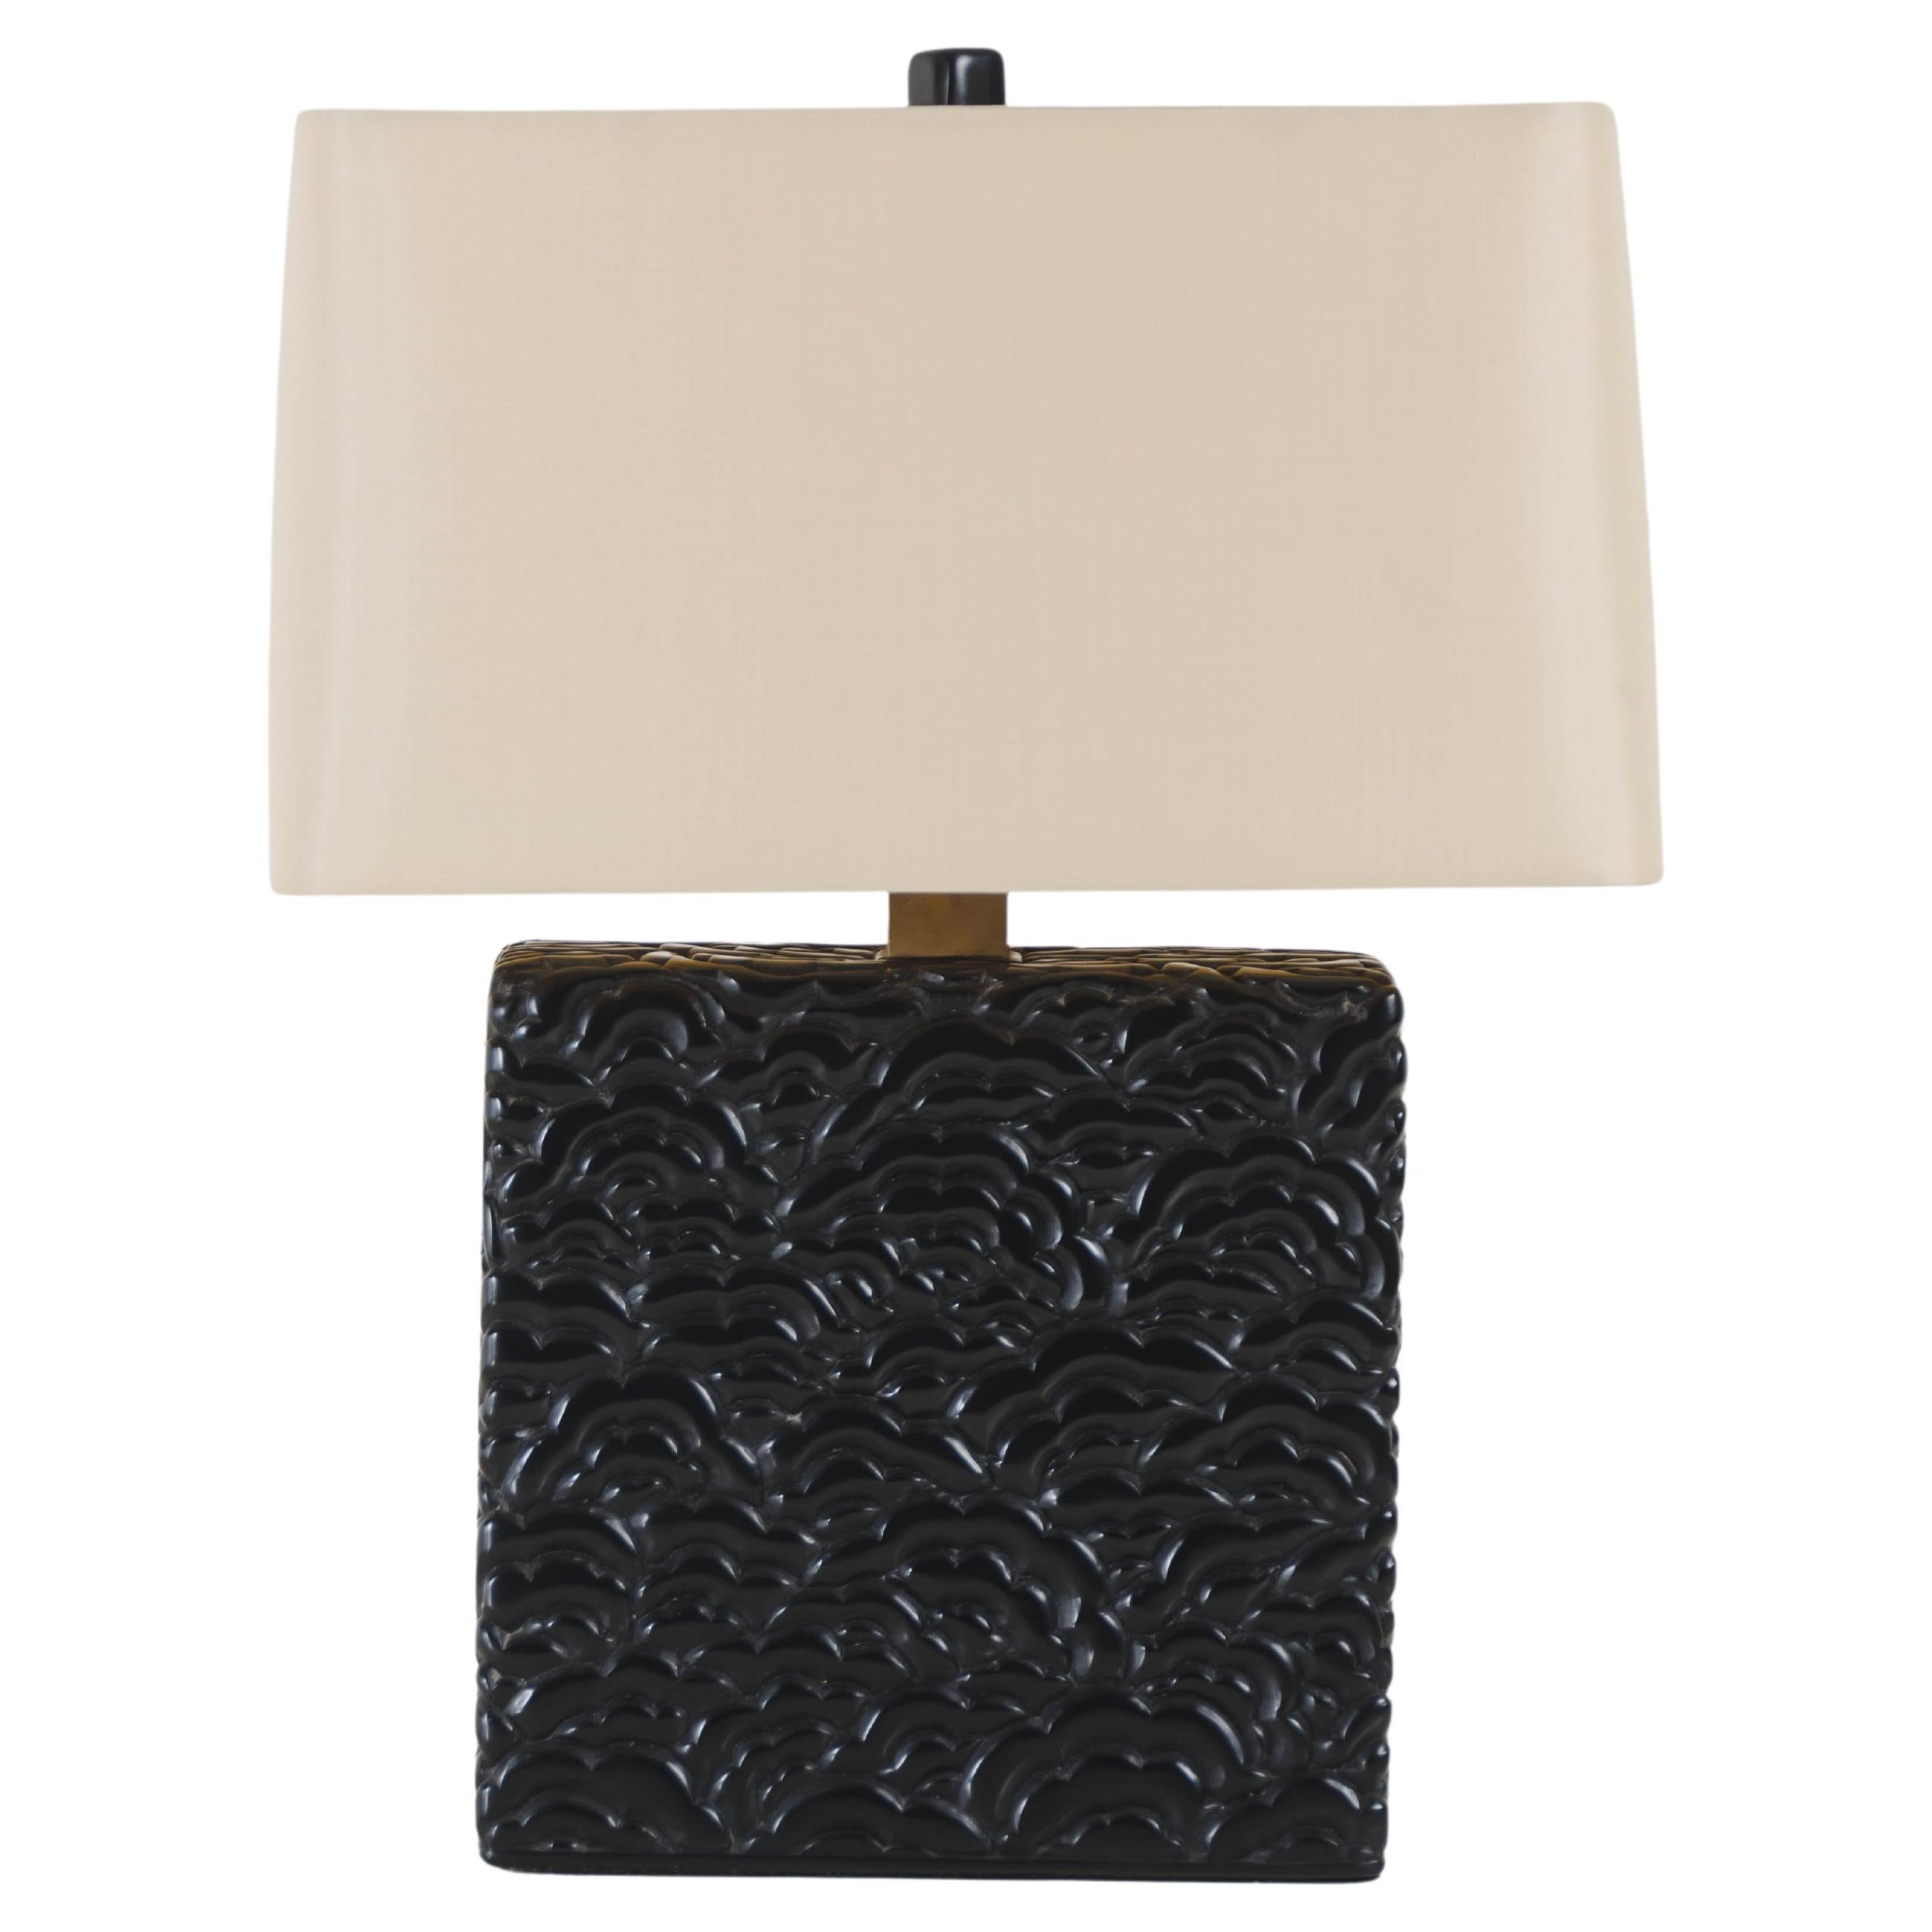 Contemporary Carved Hua Design Table Lamp in Black Lacquer by Robert Kuo For Sale